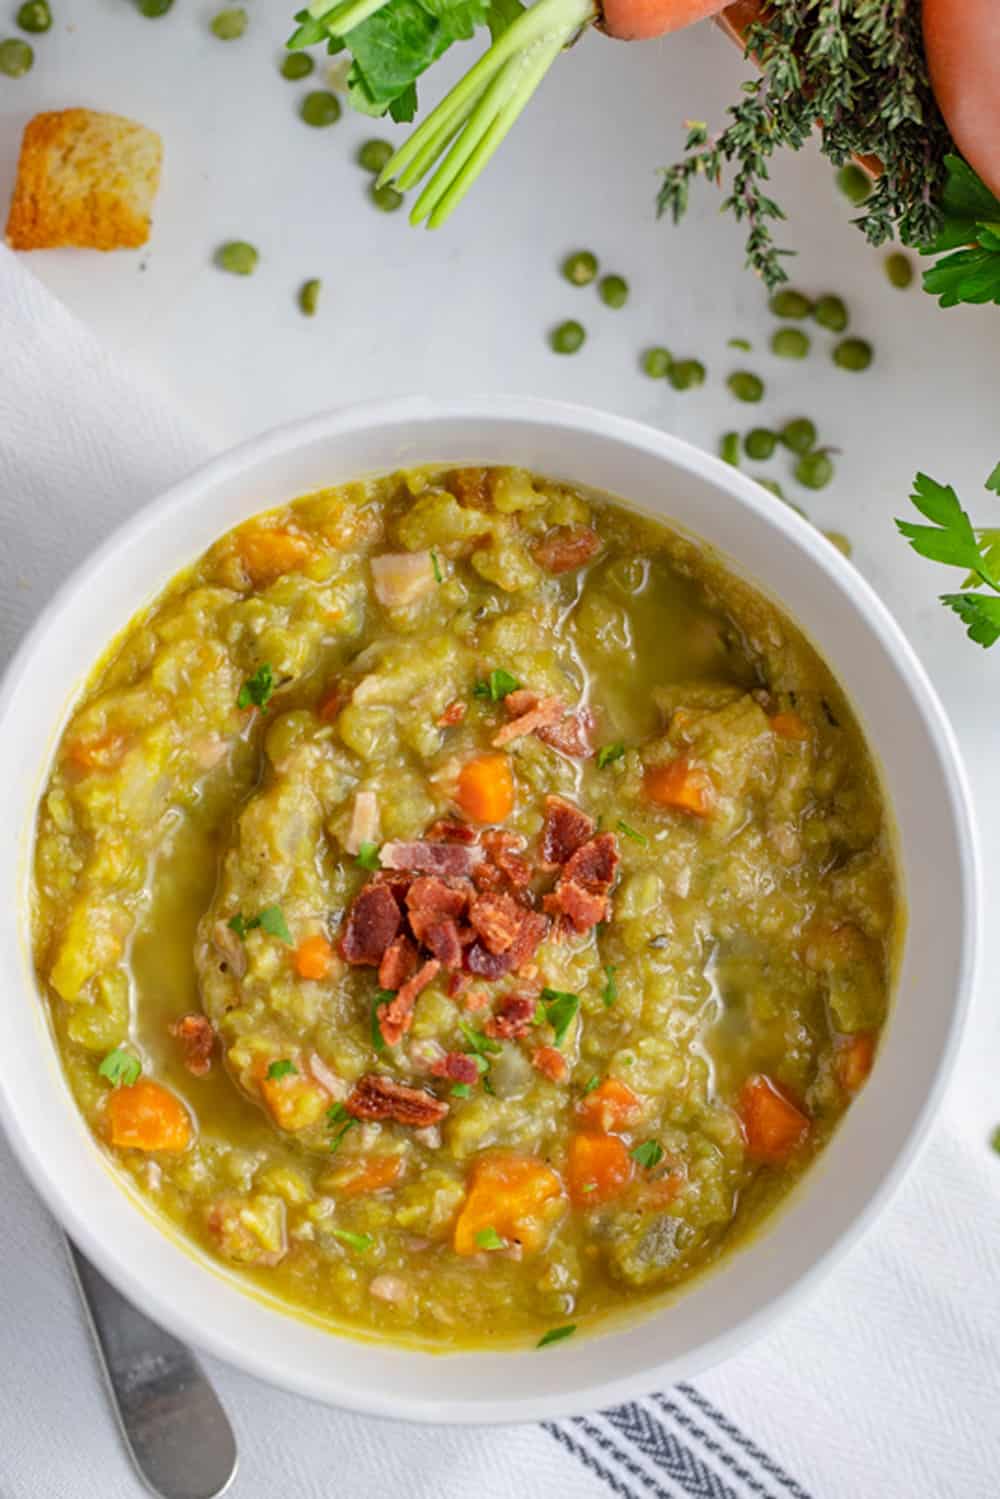 bowl of split pea soup garnished with bacon